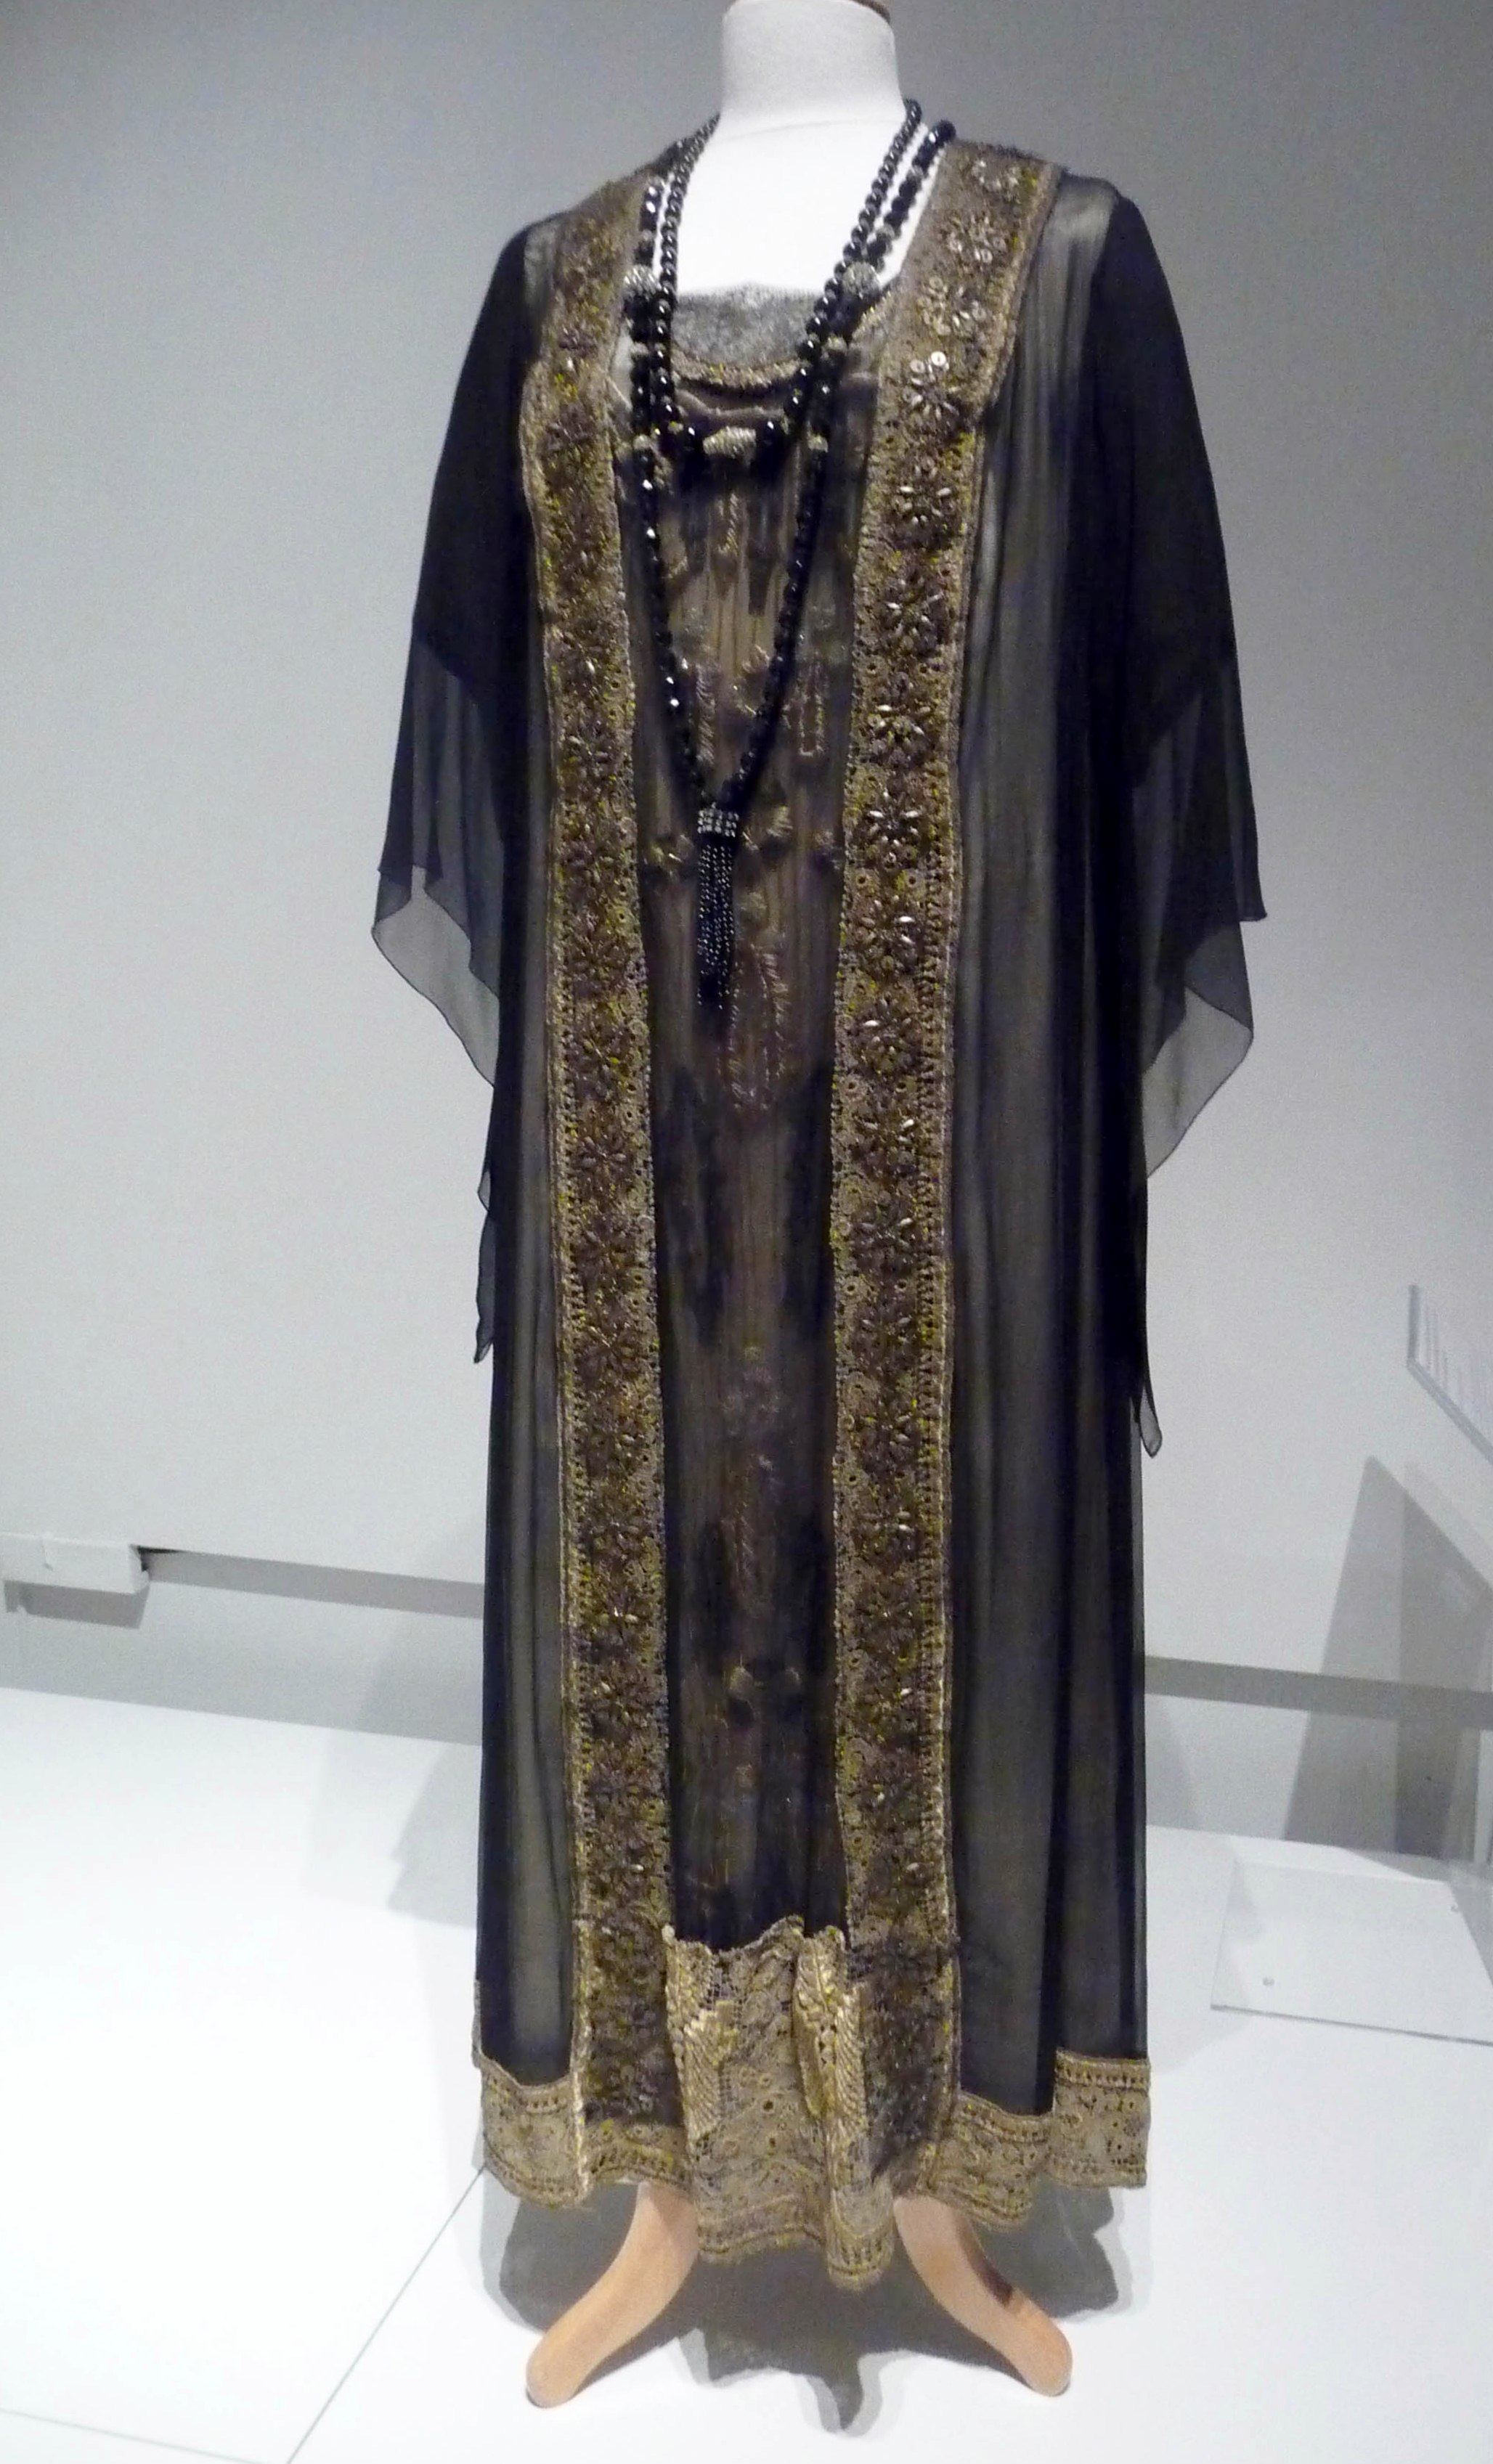 TUNIC-STYLE EVENING DRESS, cream silk under-dress with front panel embroidered in silk flock. Over-dress of black chiffon with gold metallic trim, made by Cosprop, 2012. Worn by Shirley MacLaine as Marthe Levinson in Downton Abbey.